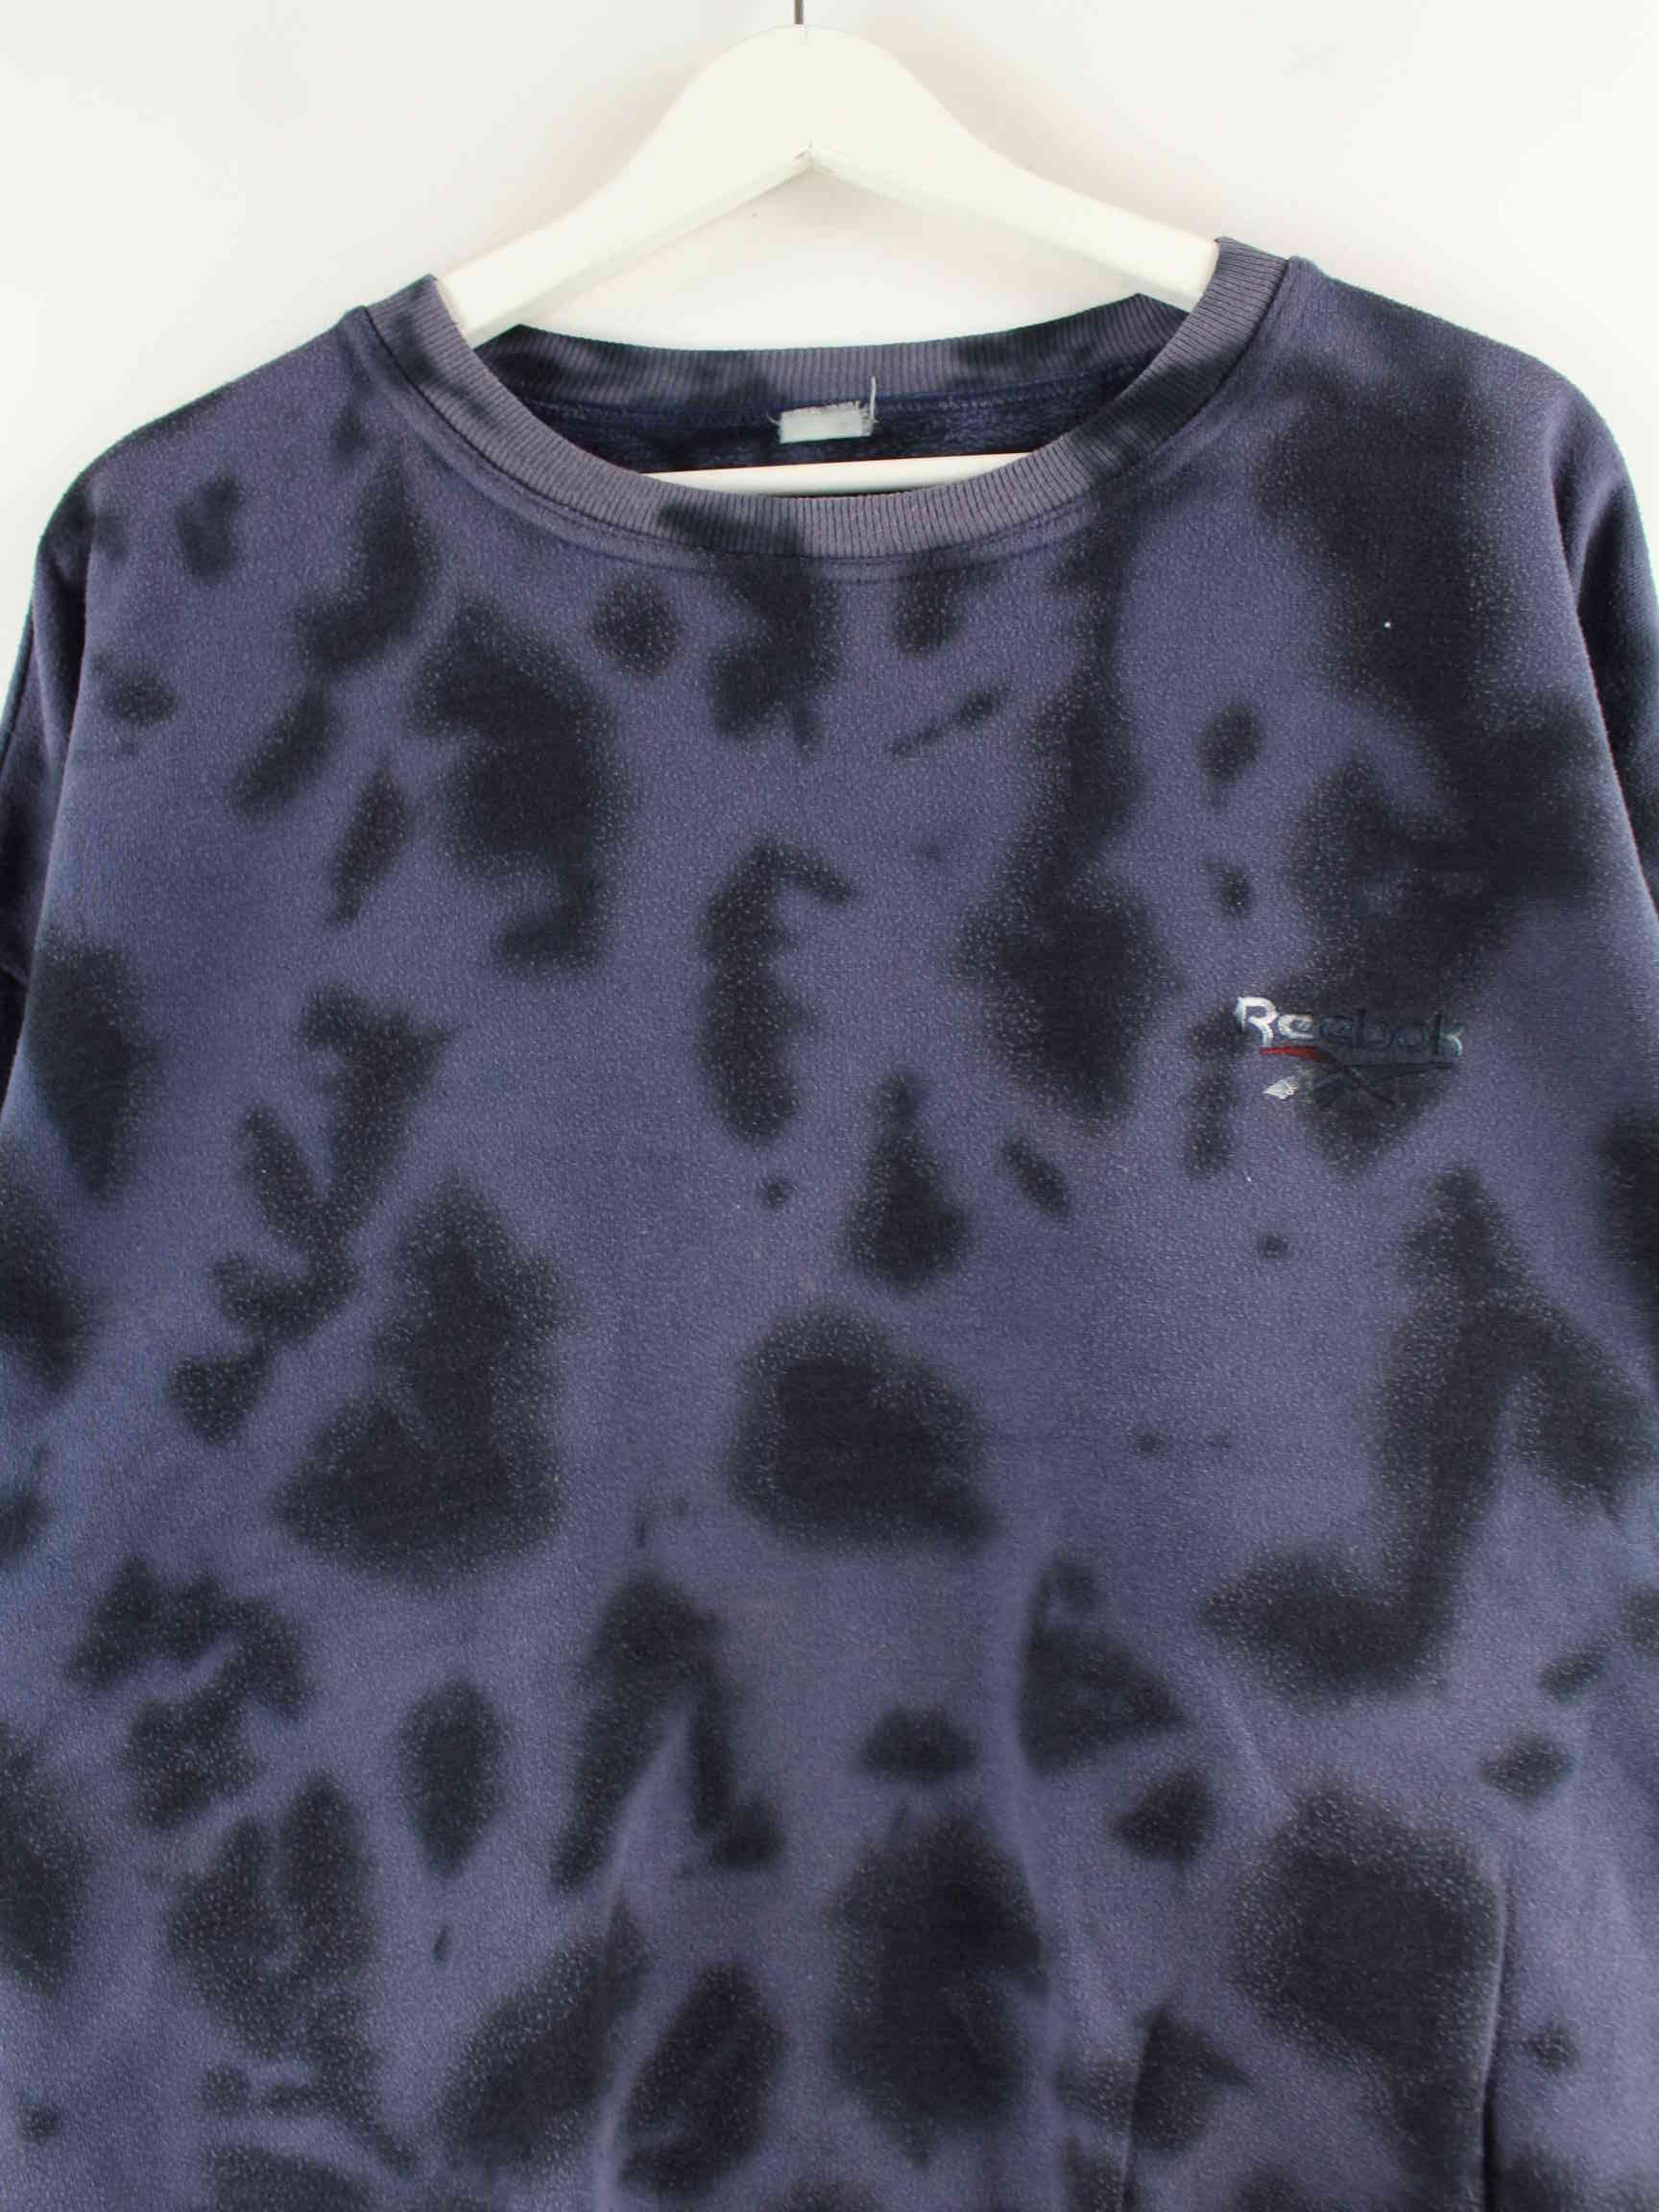 Reebok 90s Vintage Embroidered Tie Dye Sweater Lila L (detail image 1)